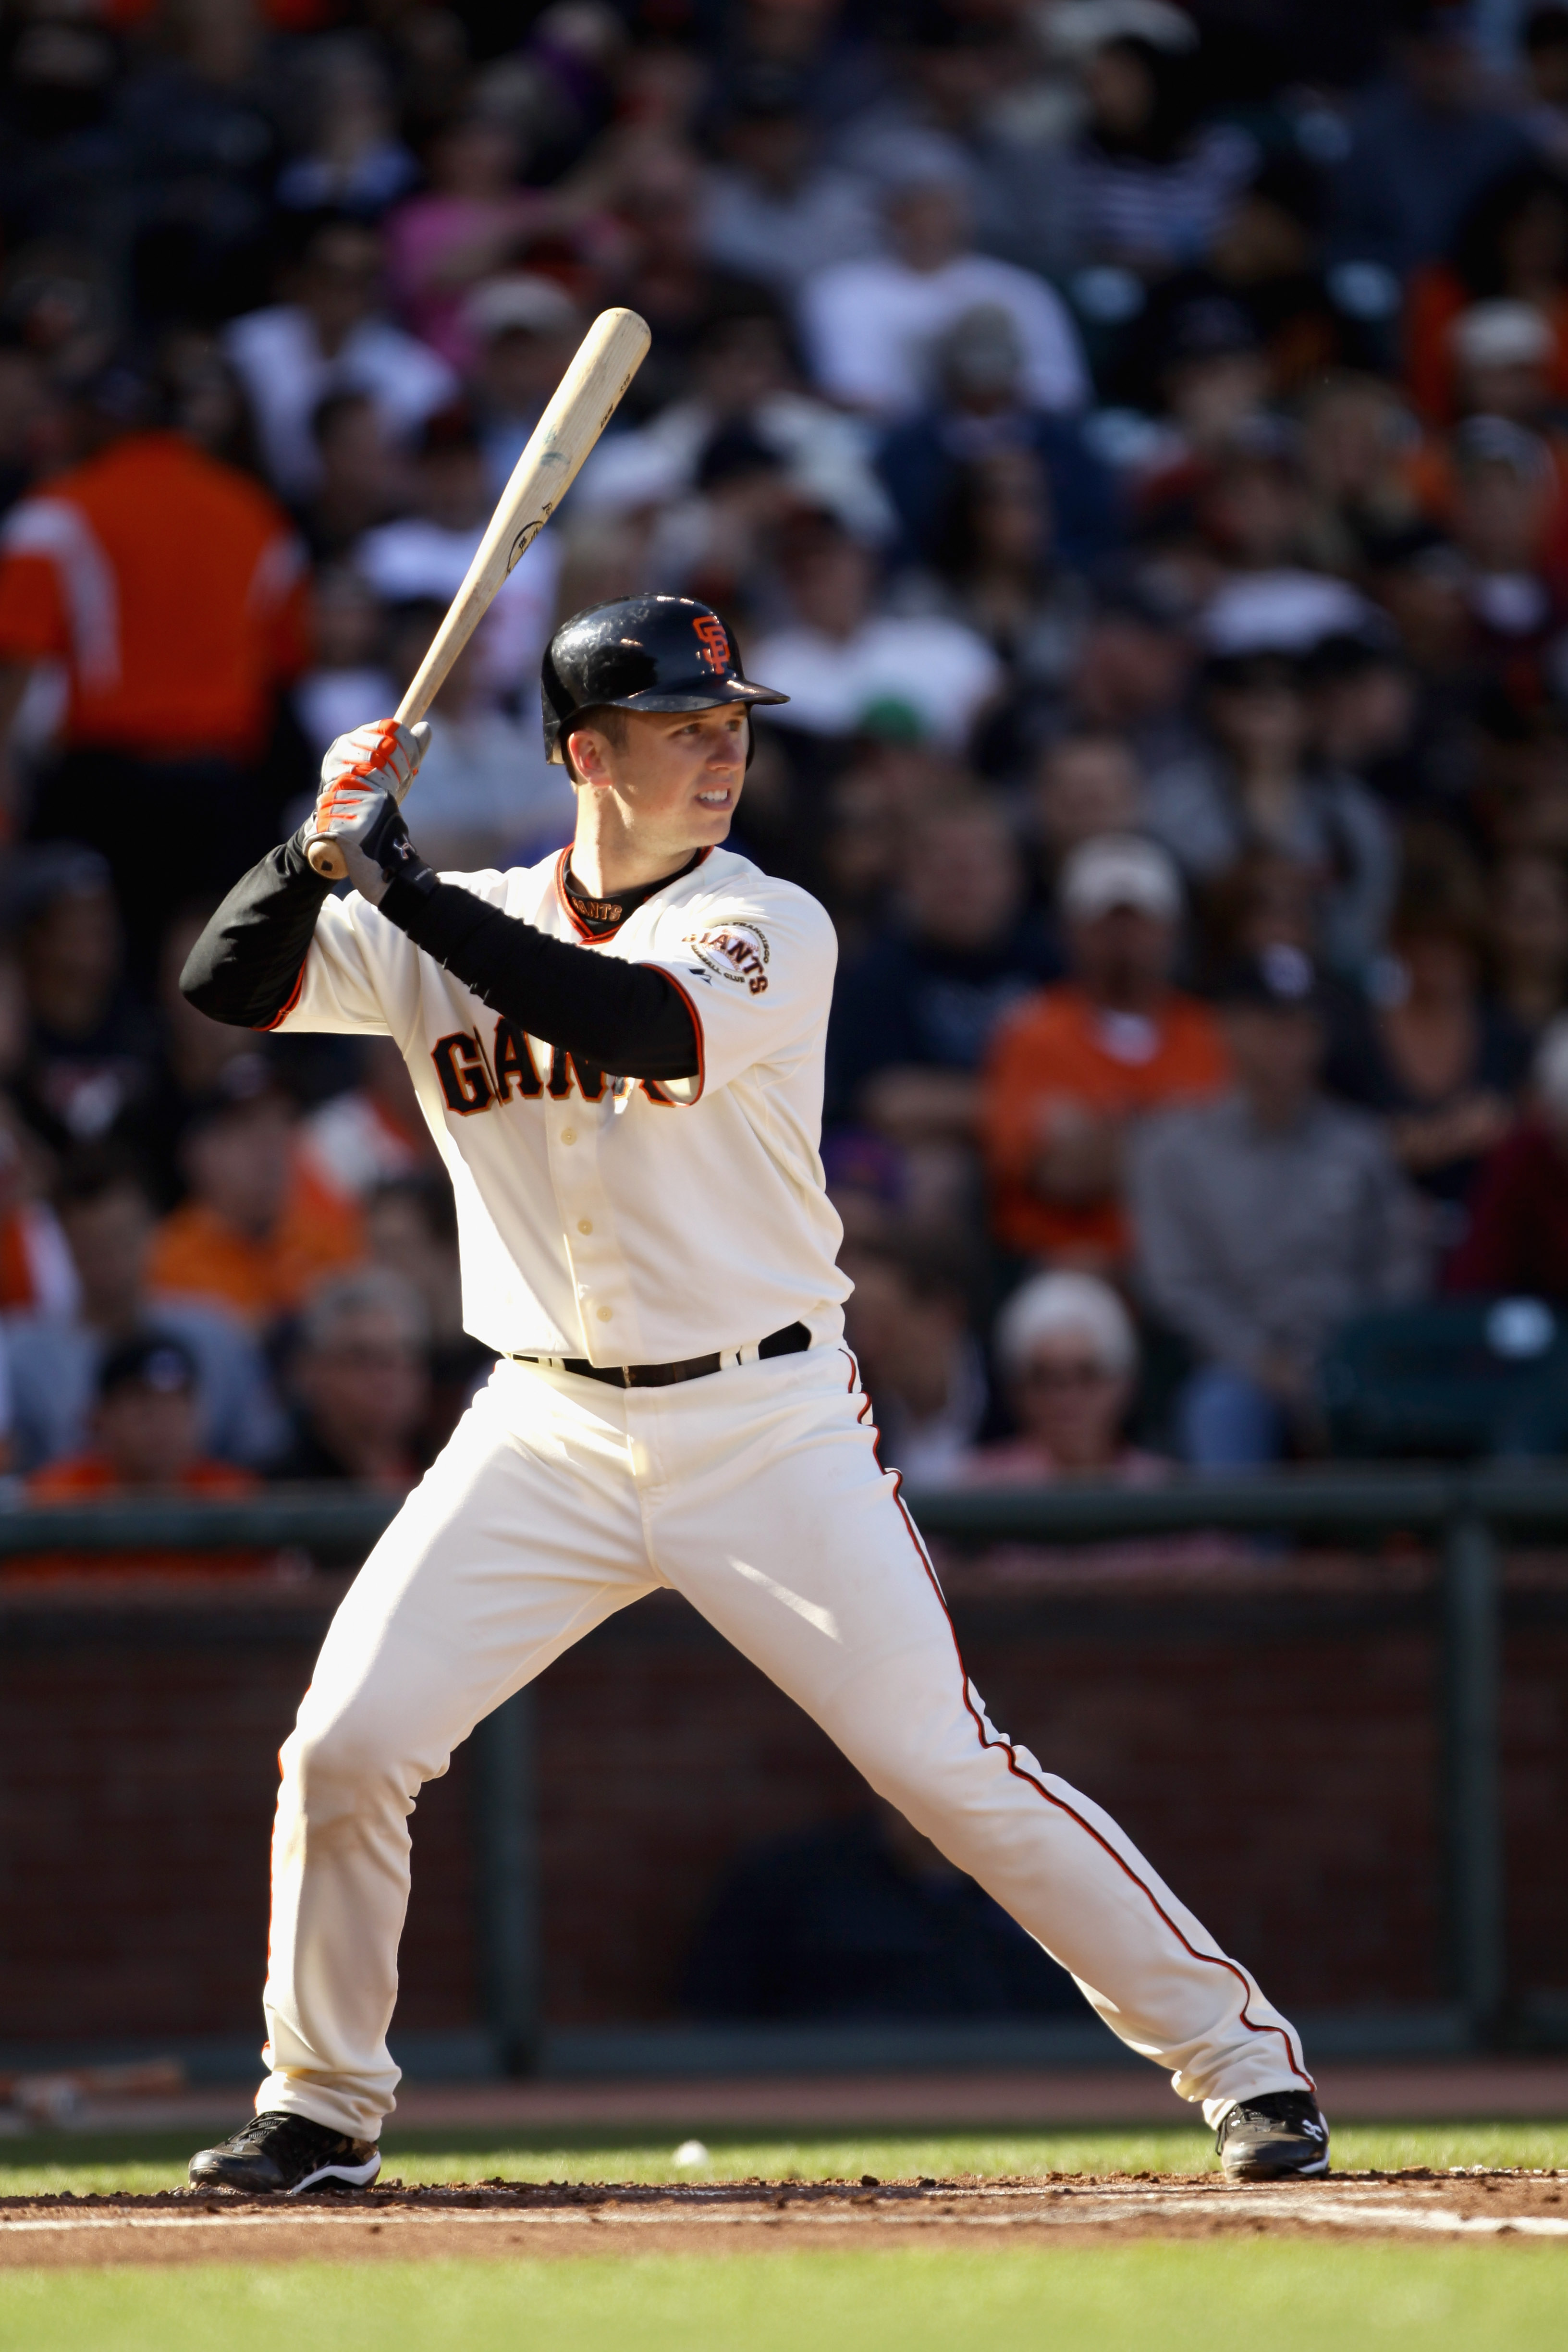 SAN FRANCISCO - AUGUST 01:  Buster Posey #28 of the San Francisco Giants bats against the Los Angeles Dodgers at AT&T Park on August 1, 2010 in San Francisco, California.  (Photo by Ezra Shaw/Getty Images)